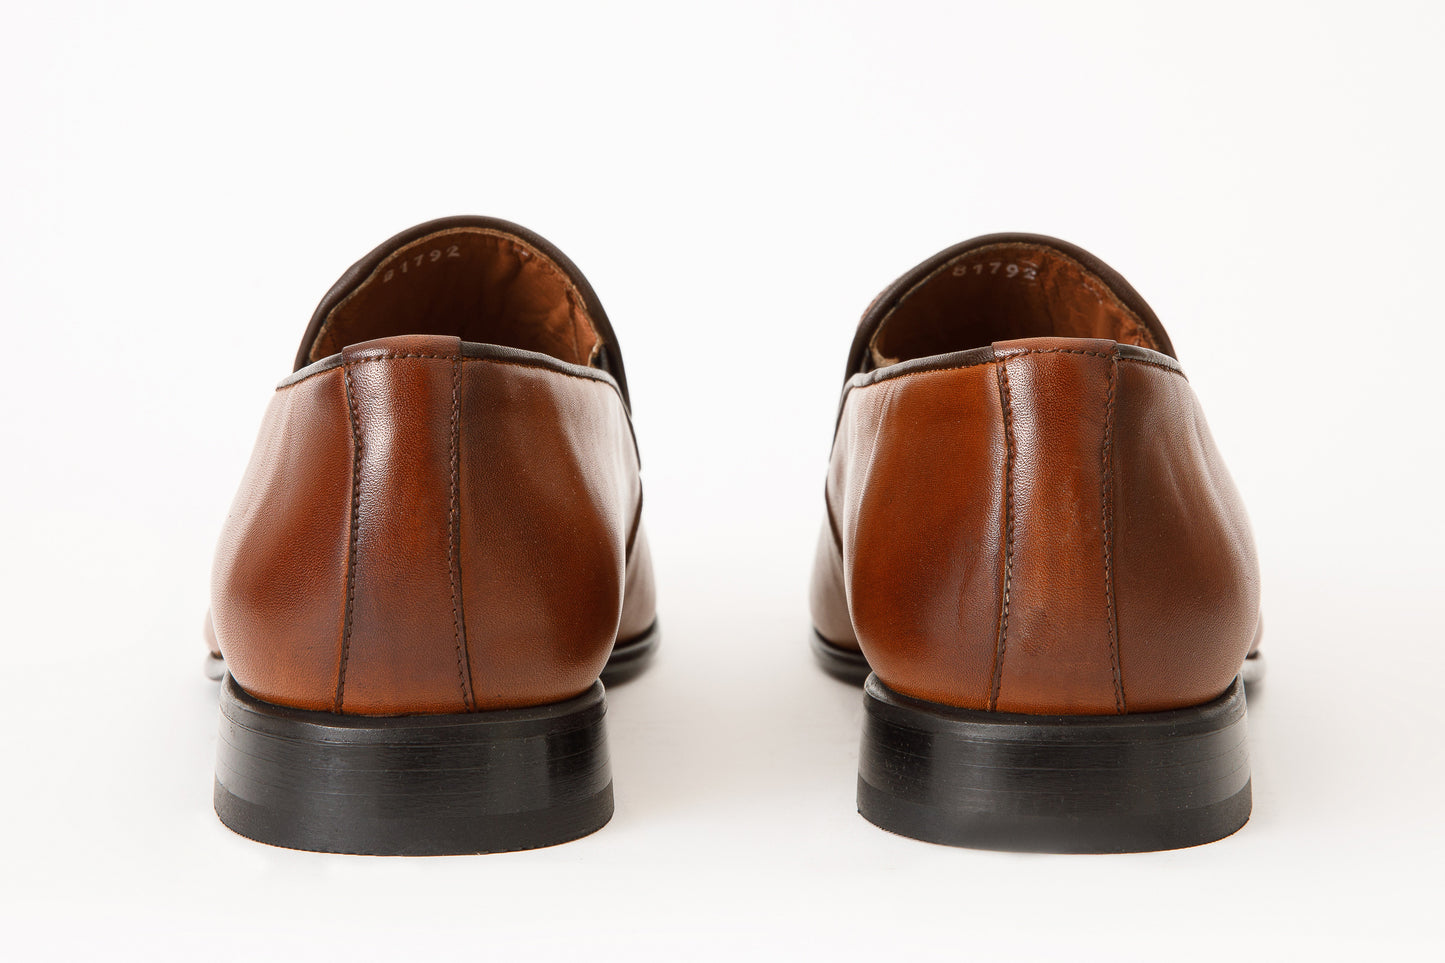 The Migues Tan Leather Loafer Men  Shoe